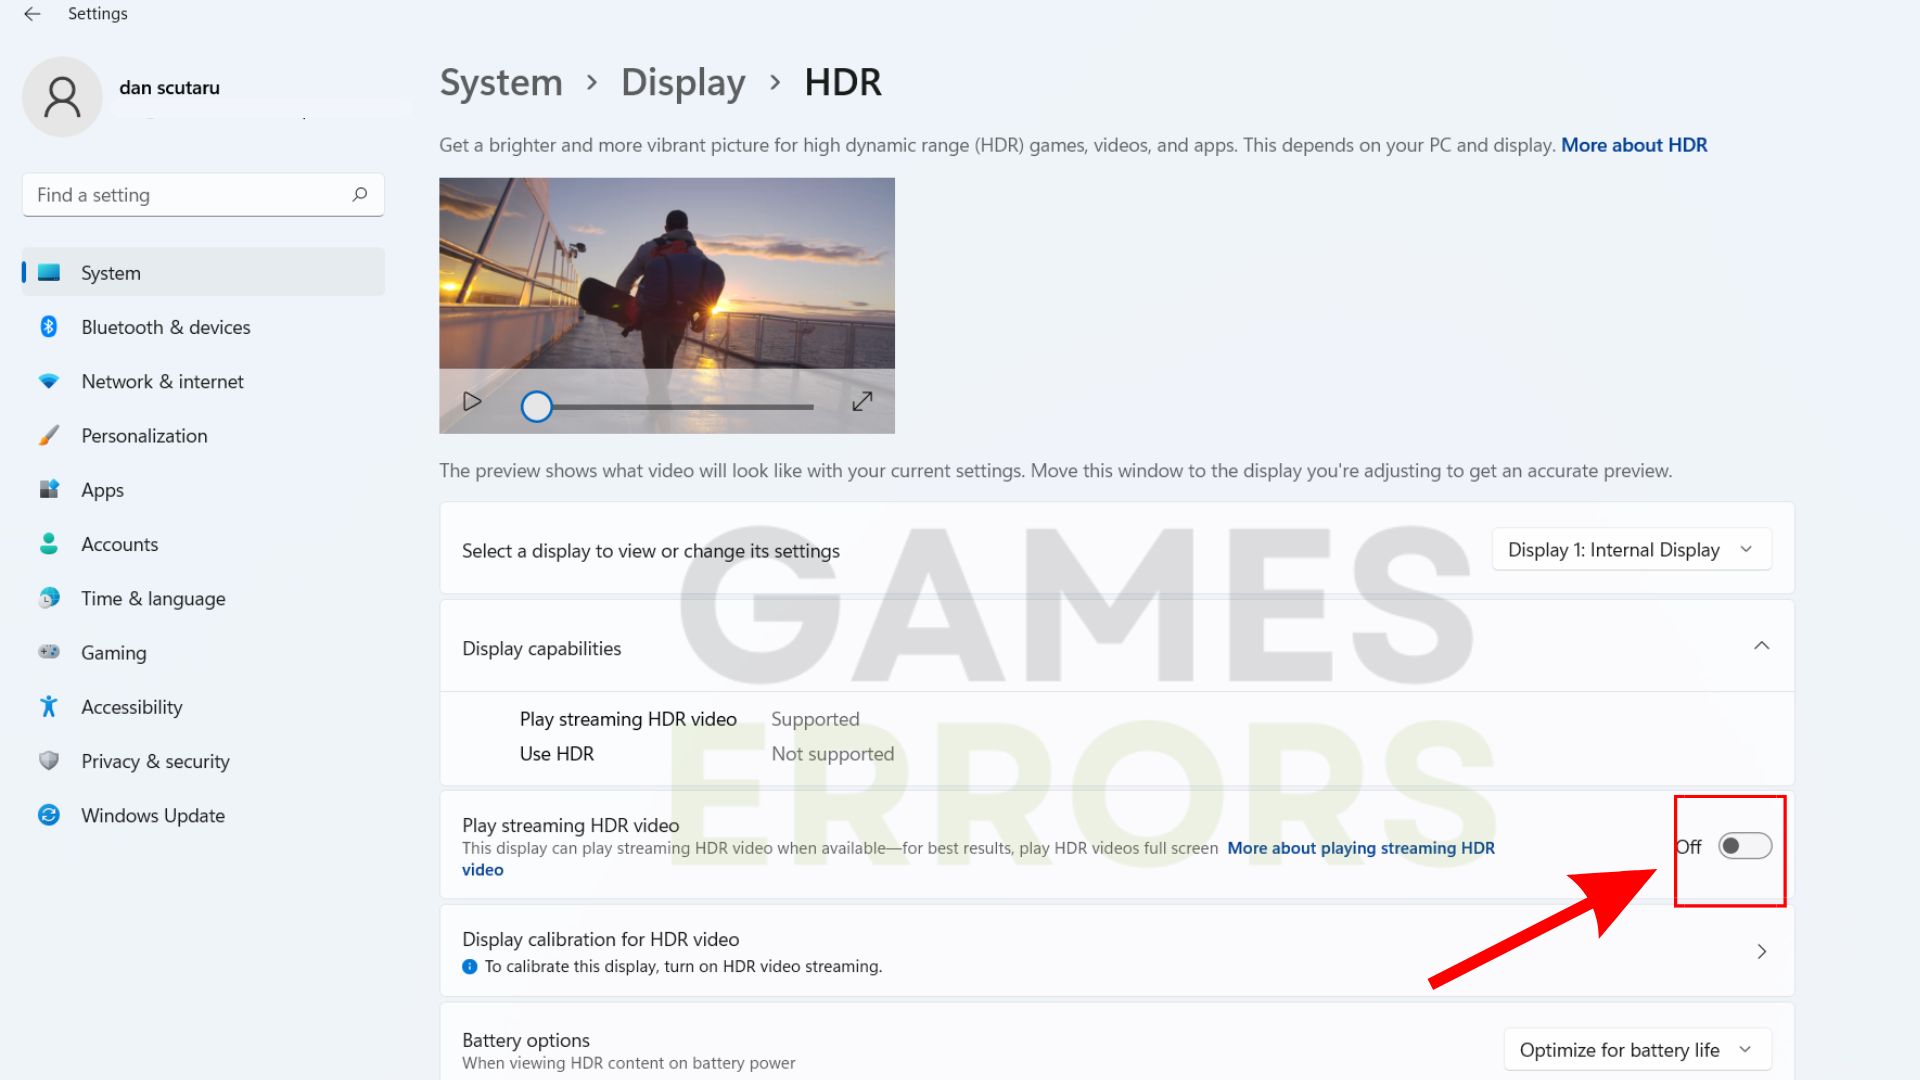 Turn off HDR to fix WoW screen flickering